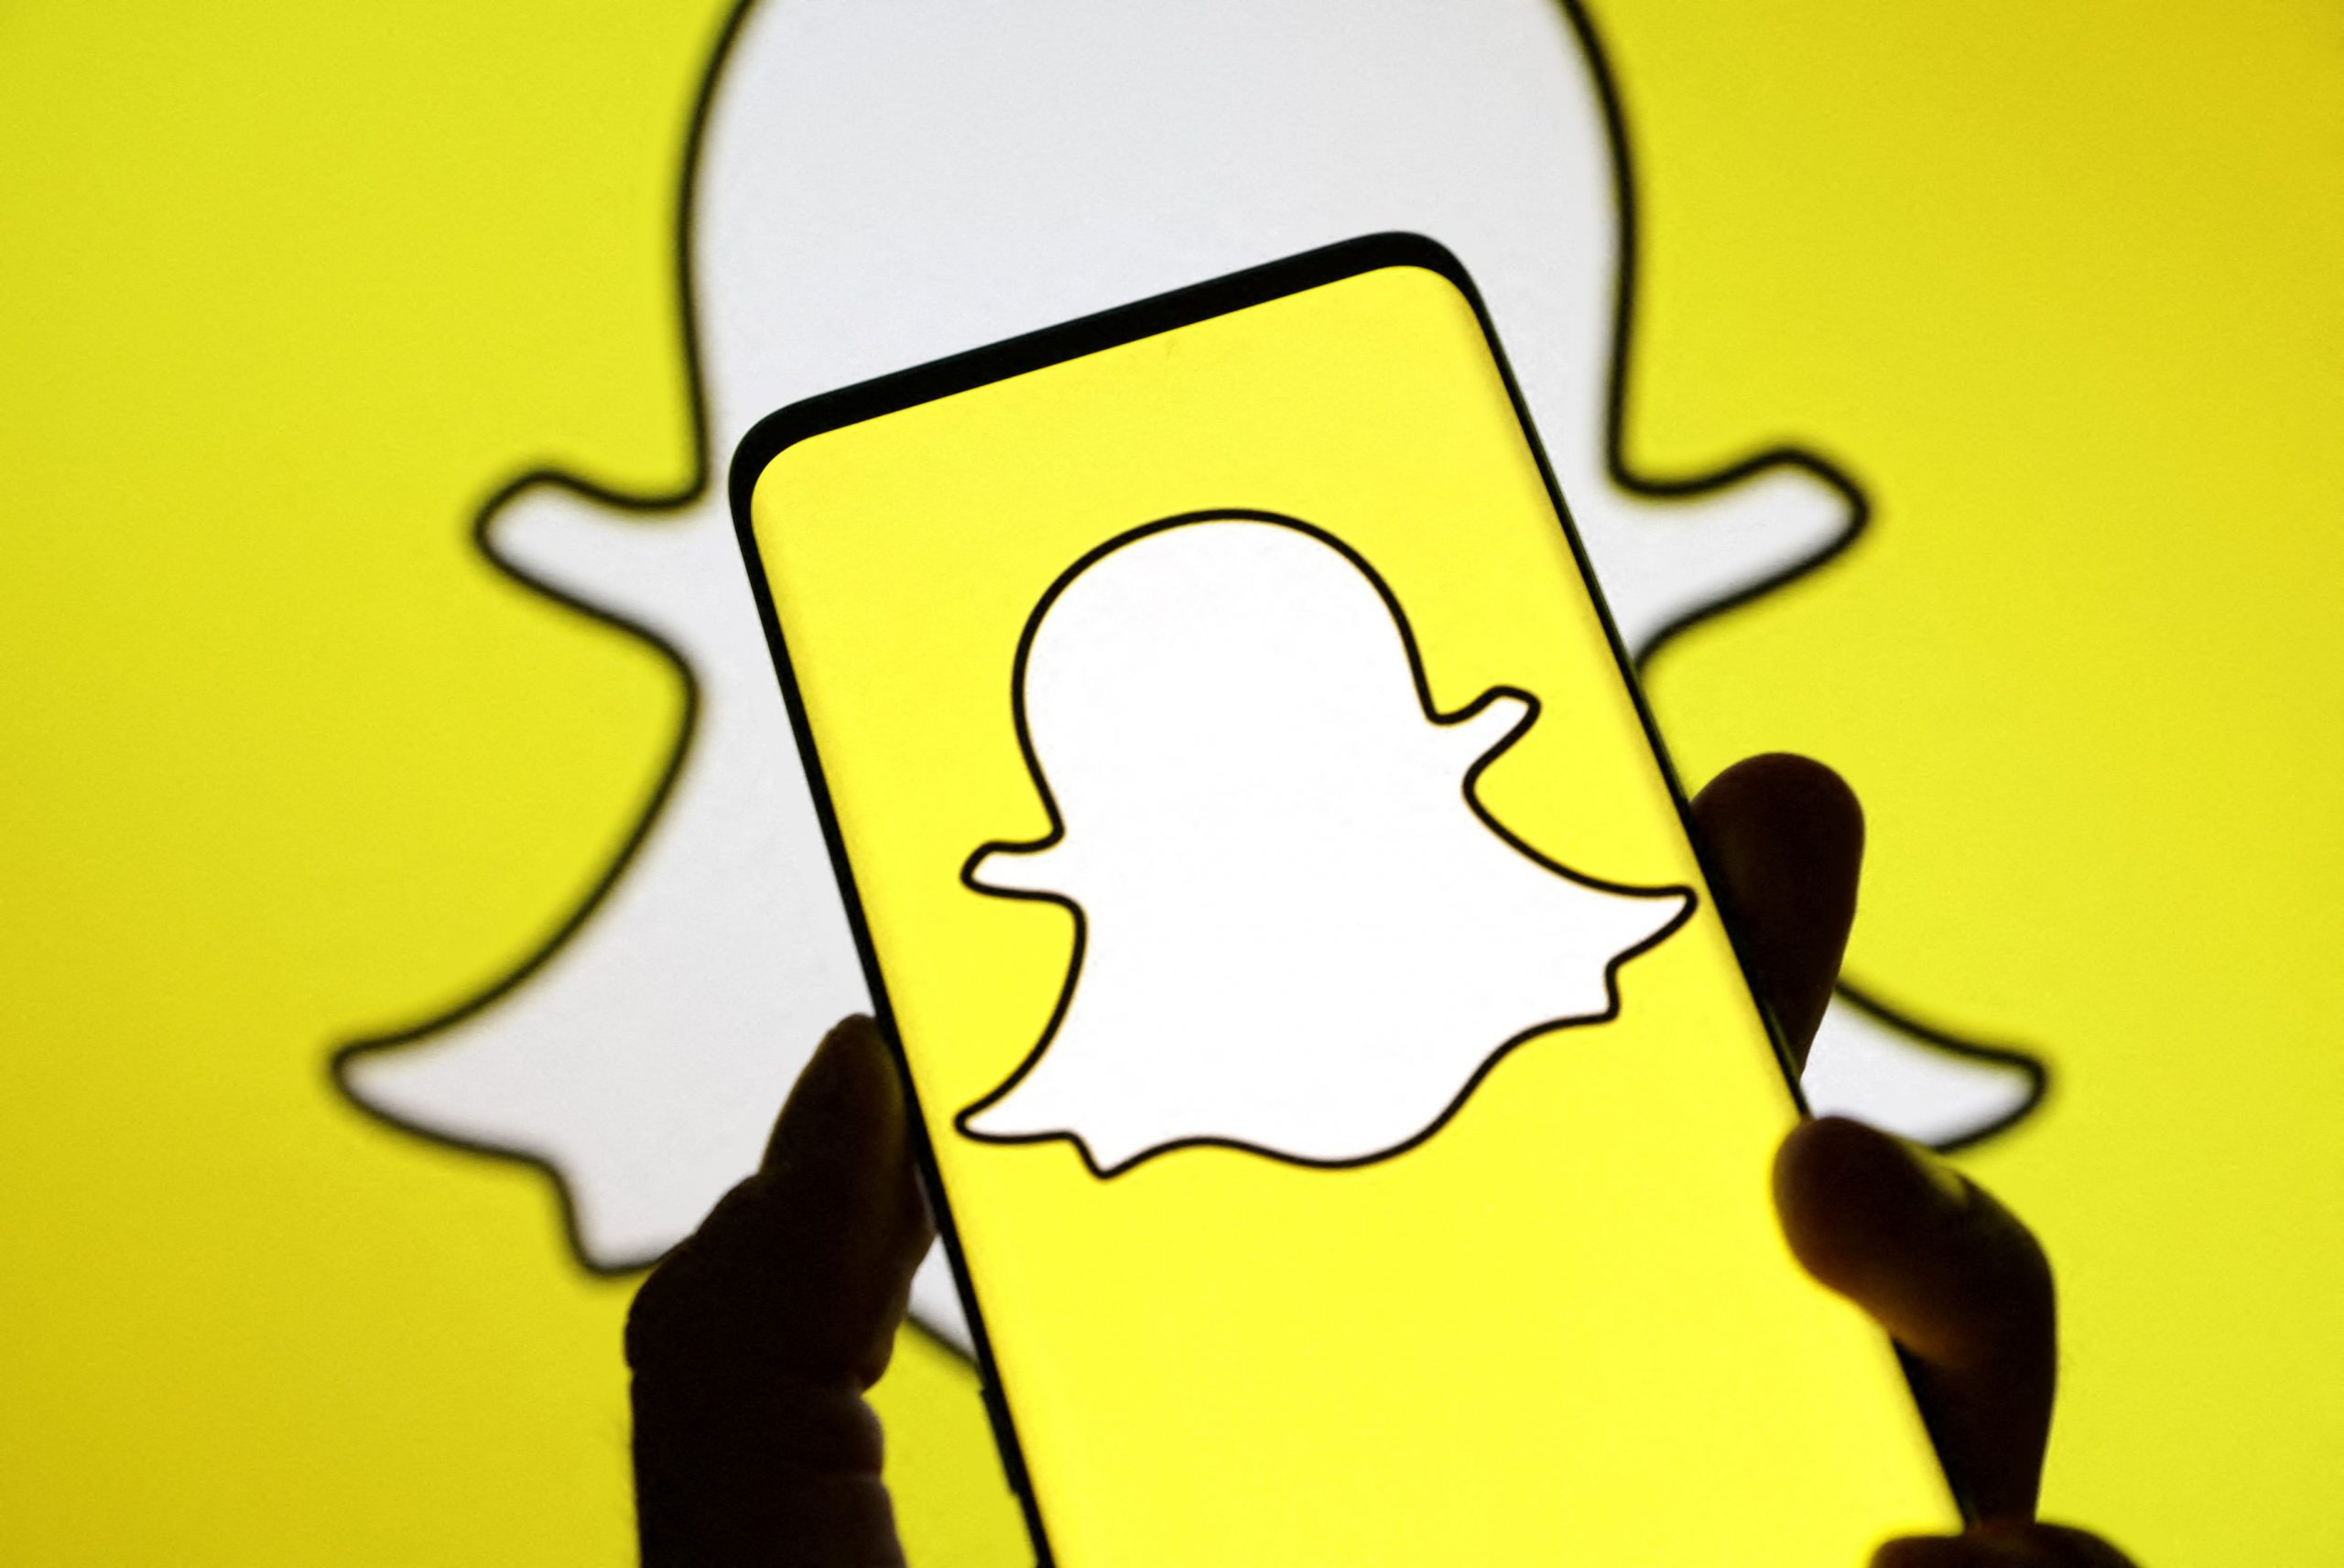 Teen Boys Are Falling for a Snapchat Nude-Photo Scam. Here’s How to Avoid It.